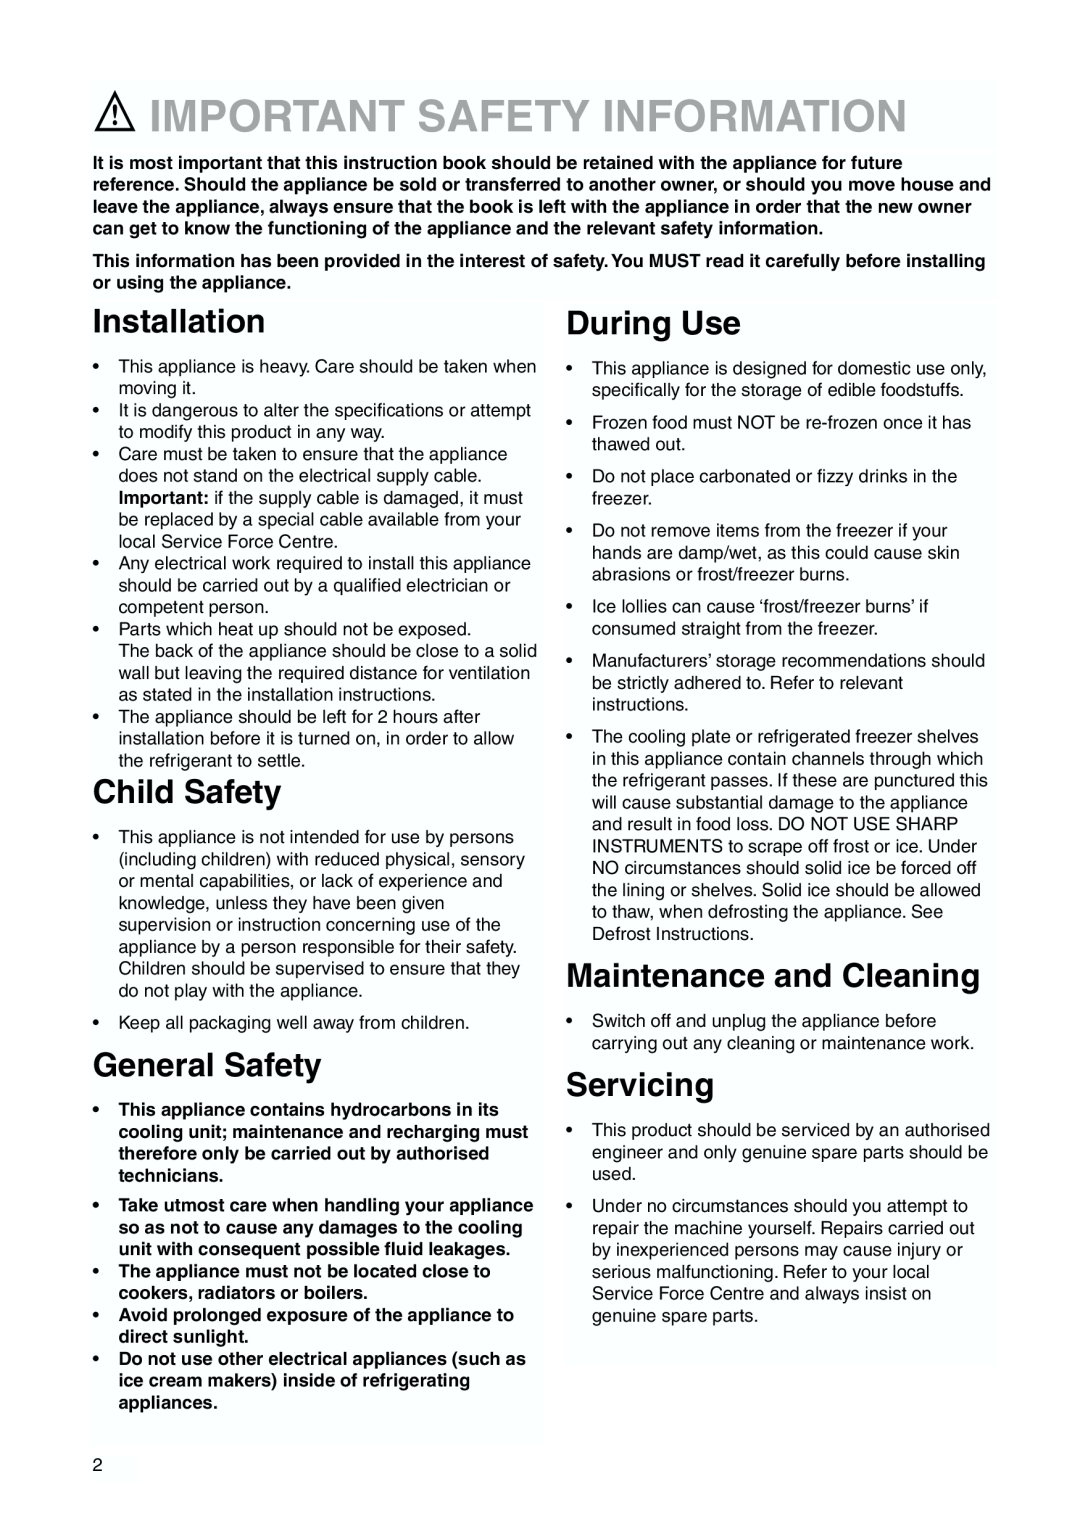 Zanussi ZBB6286 manual Important Safety Information, Installation, Child Safety, General Safety, During Use, Servicing 